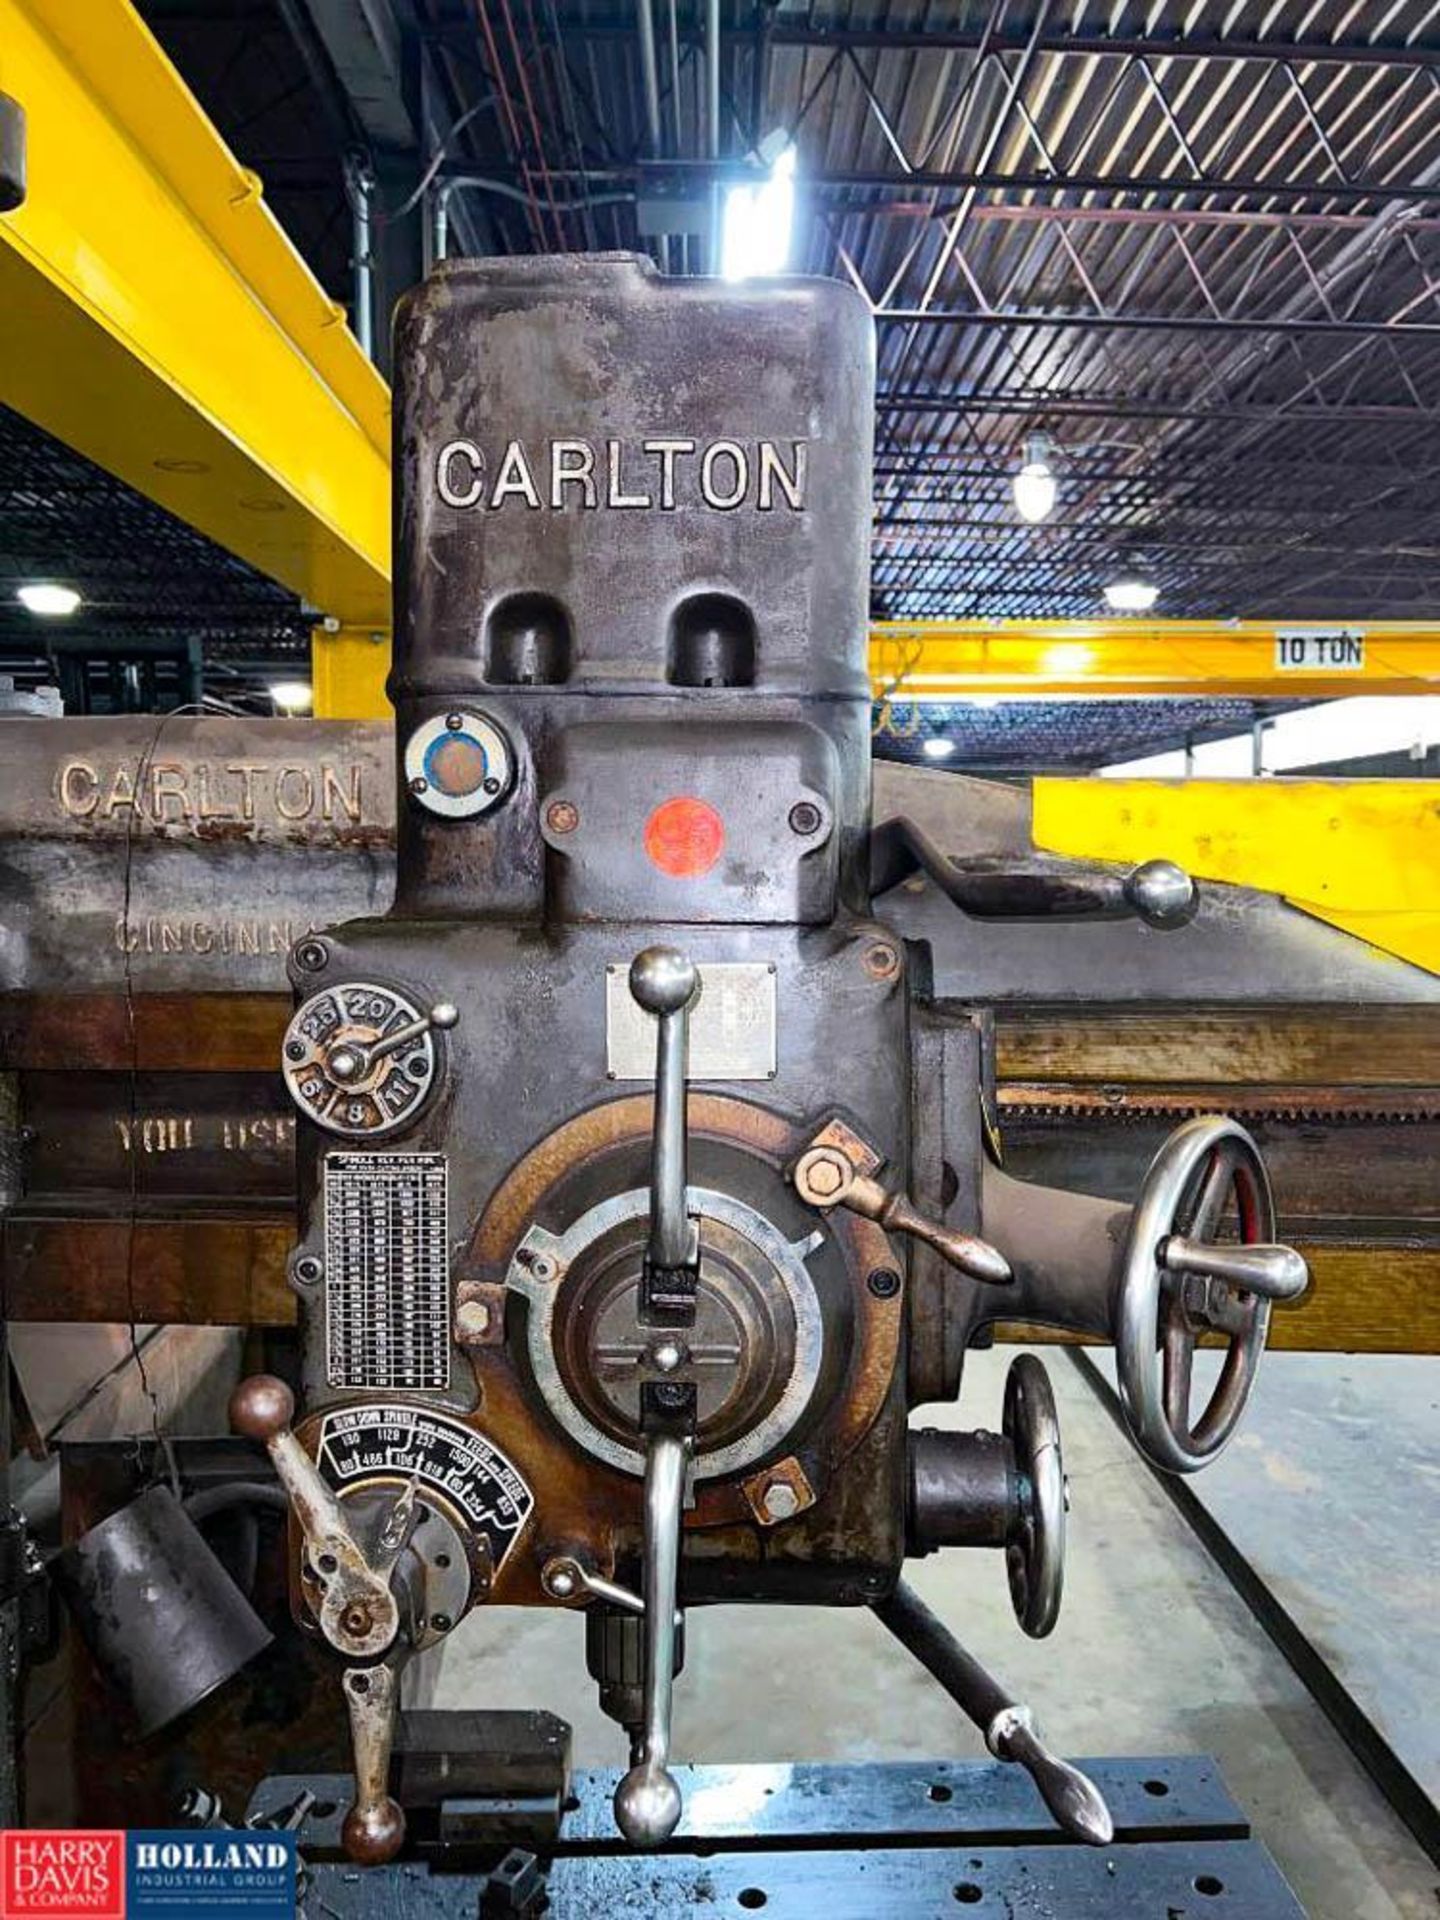 The Carlton Machine Tool, Co. Radial Drill Press - Image 4 of 4